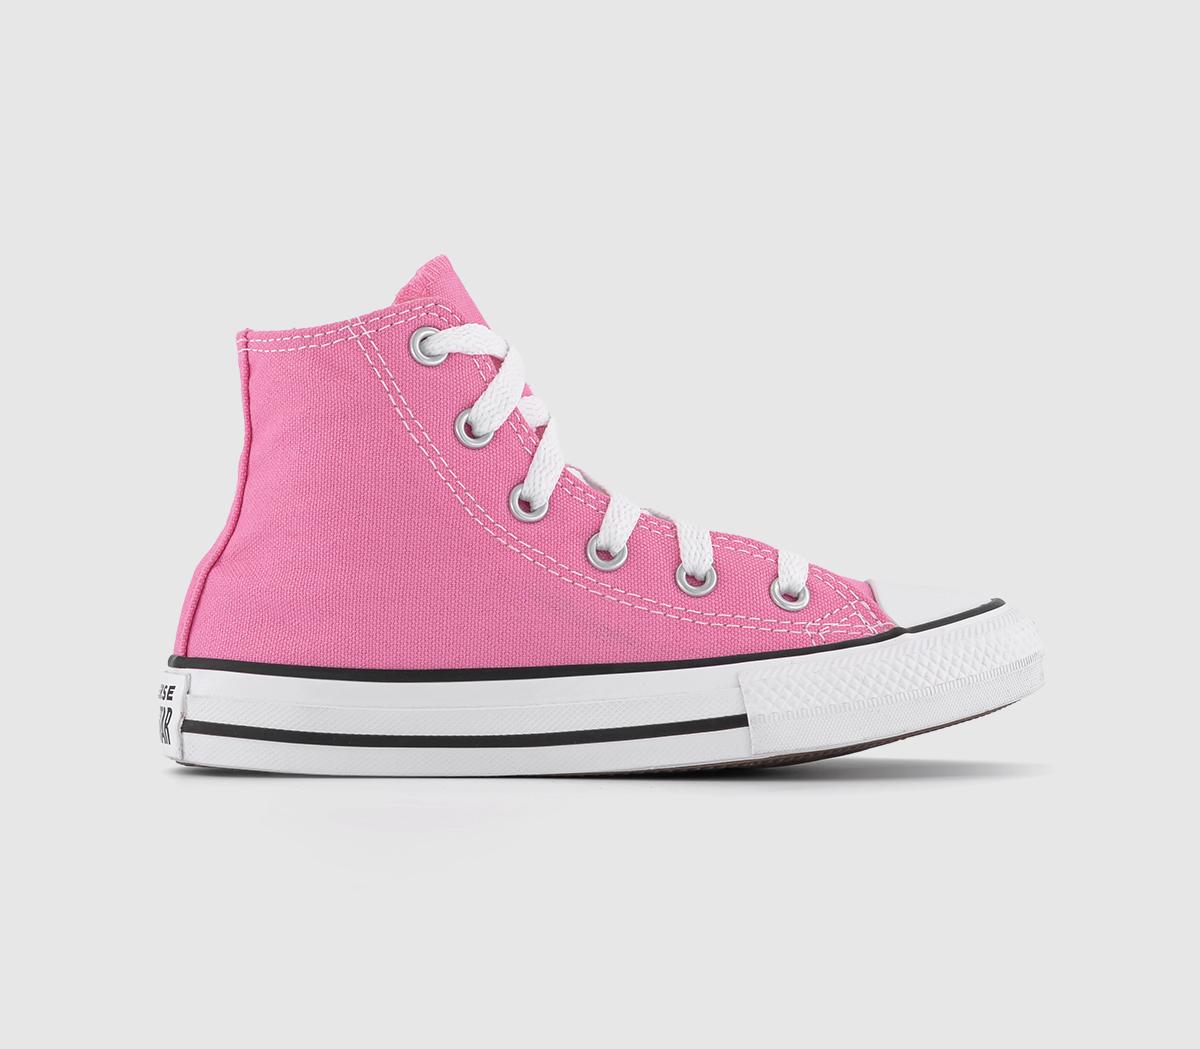 ConverseAll Star Hi Mid SizesPink Canvas